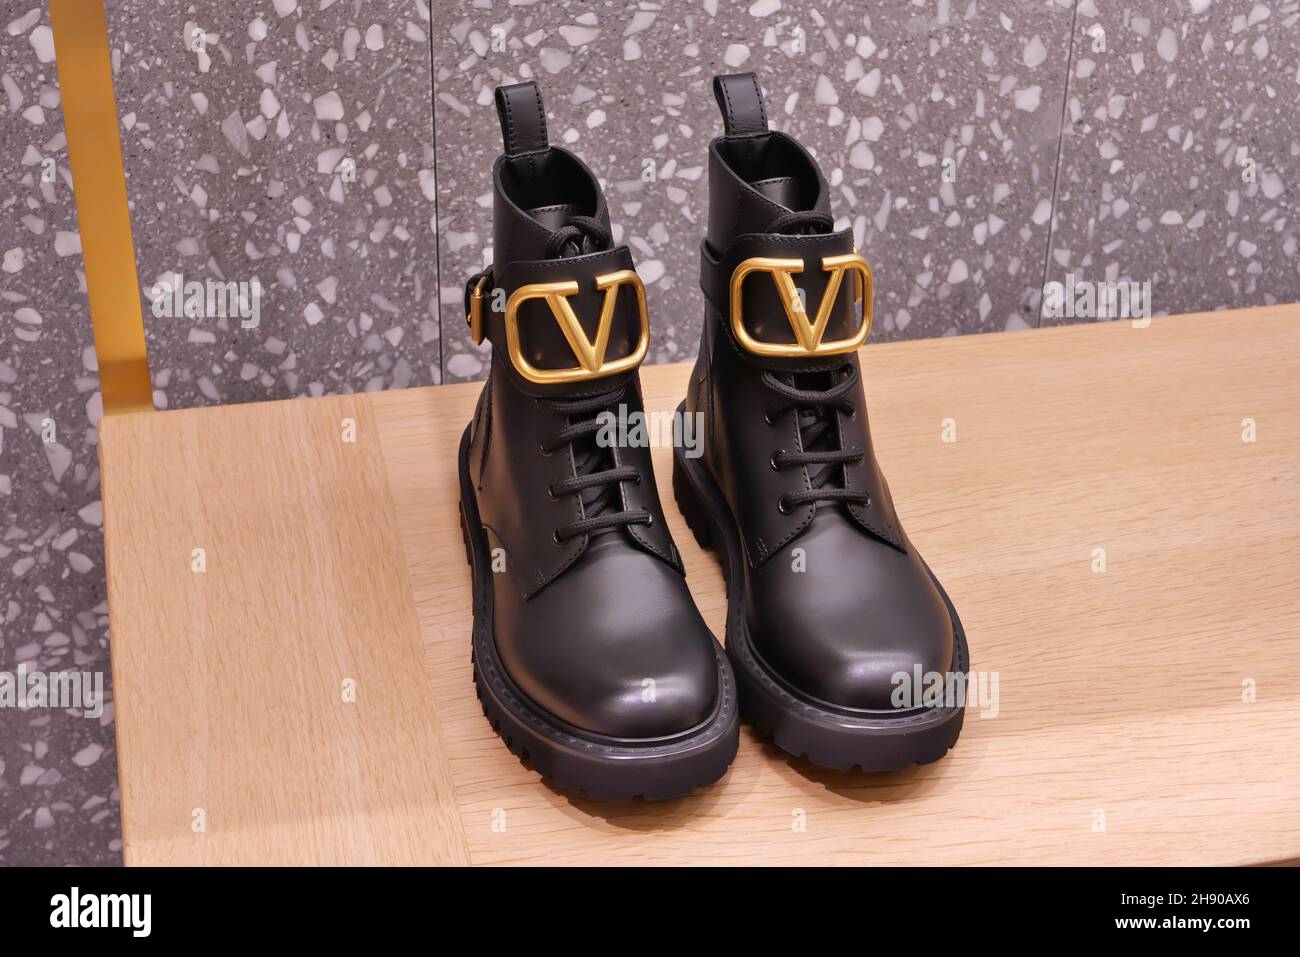 VALENTINO BOOTS ON DISPLAY INSIDE THE FASHION STORE Stock Photo - Alamy